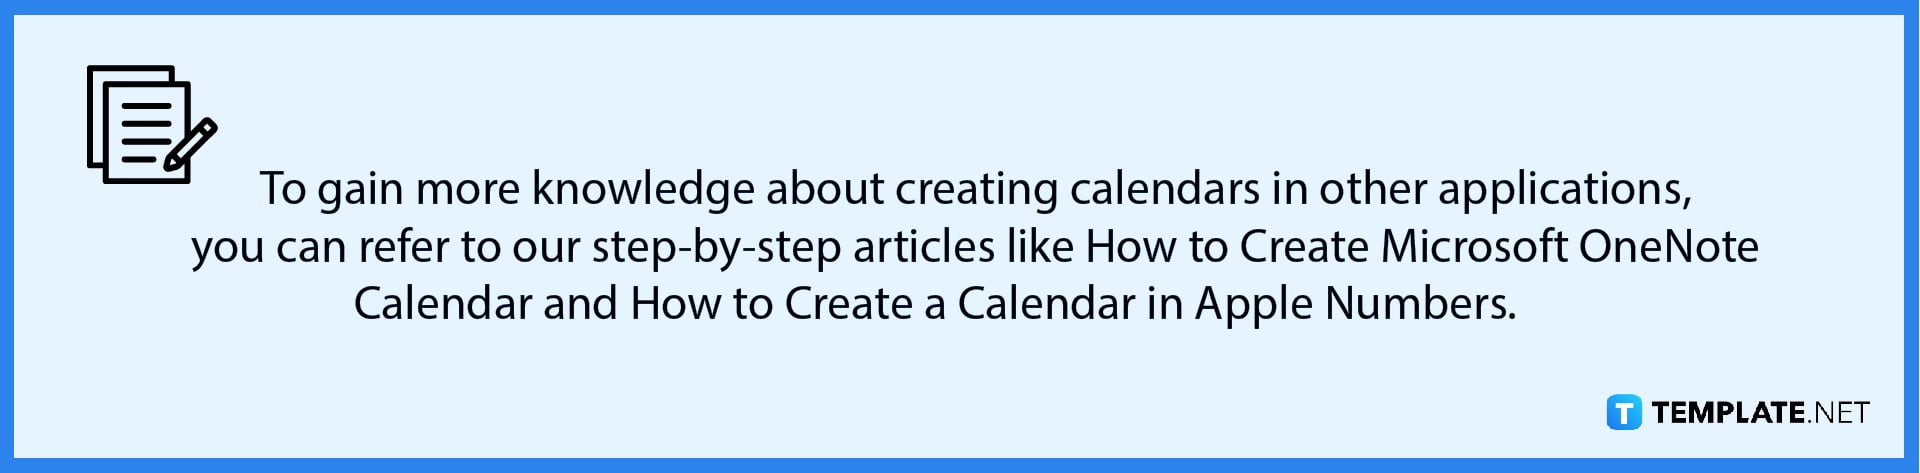 how-to-make-a-calendar-in-microsoft-publisher-note-1